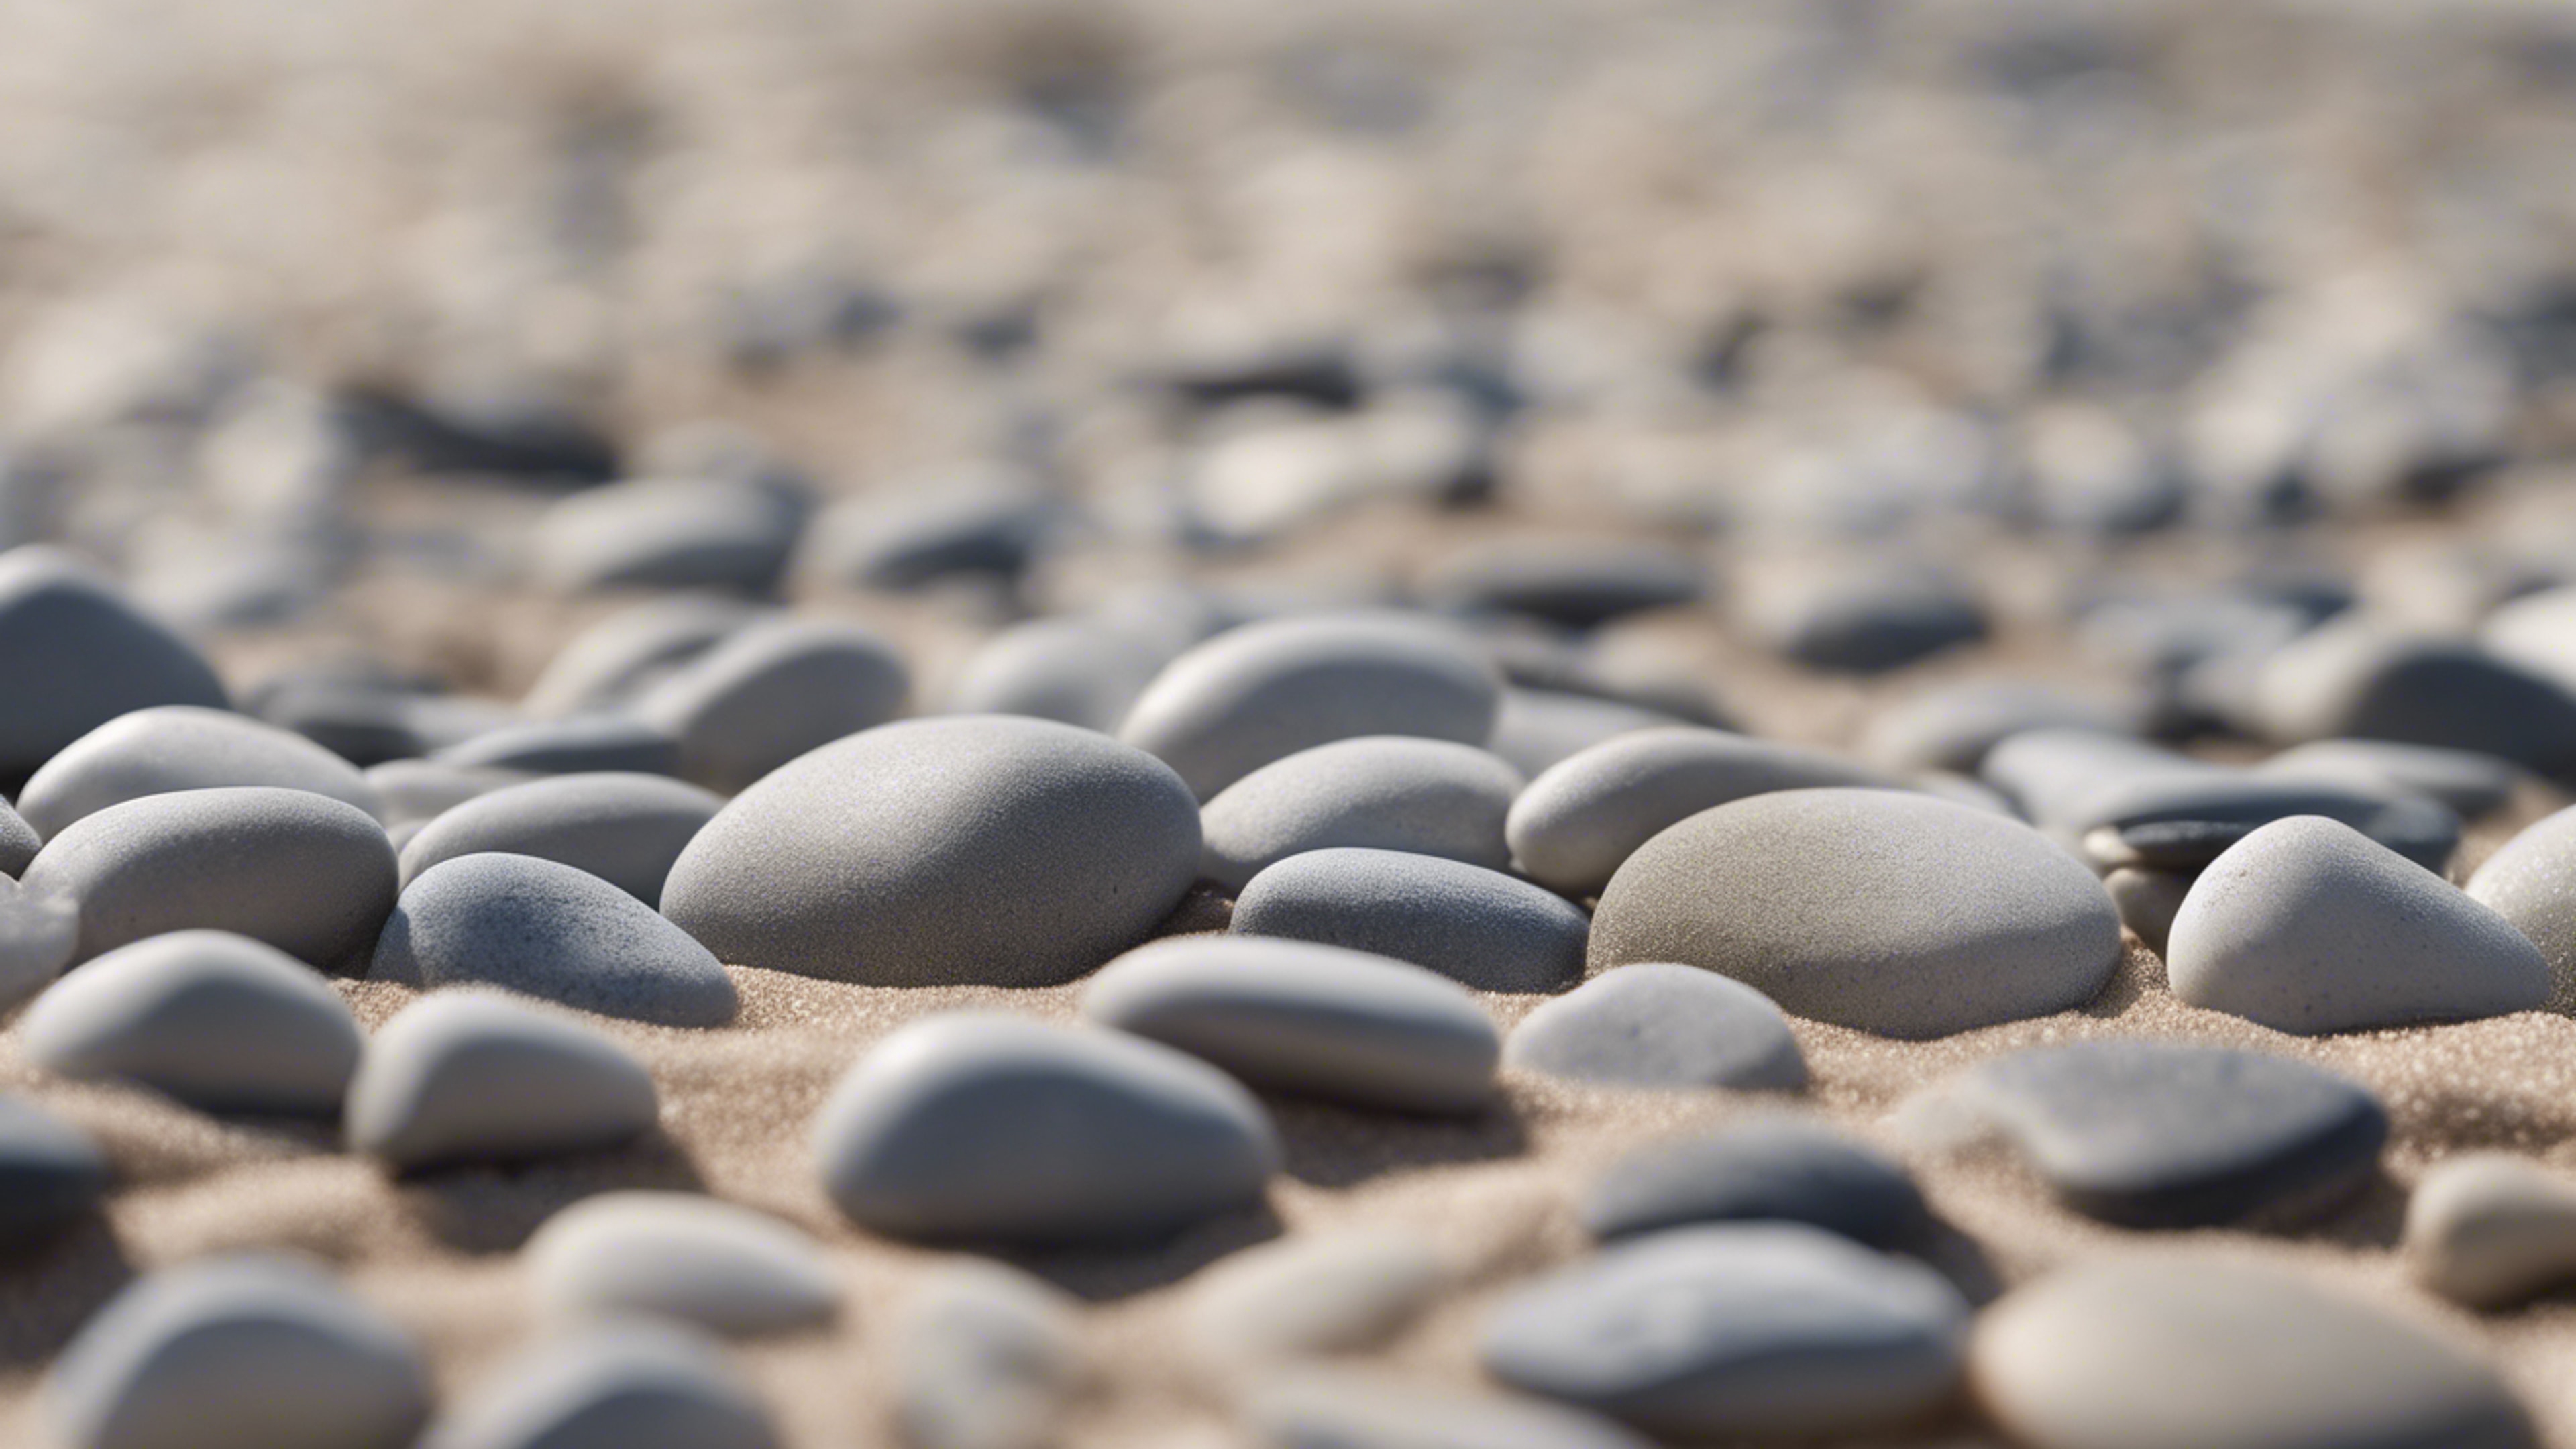 A collection of light gray pebbles arranged in an intricate pattern on a sandy beach. Hintergrund[7440af21c01a4a2abeaf]